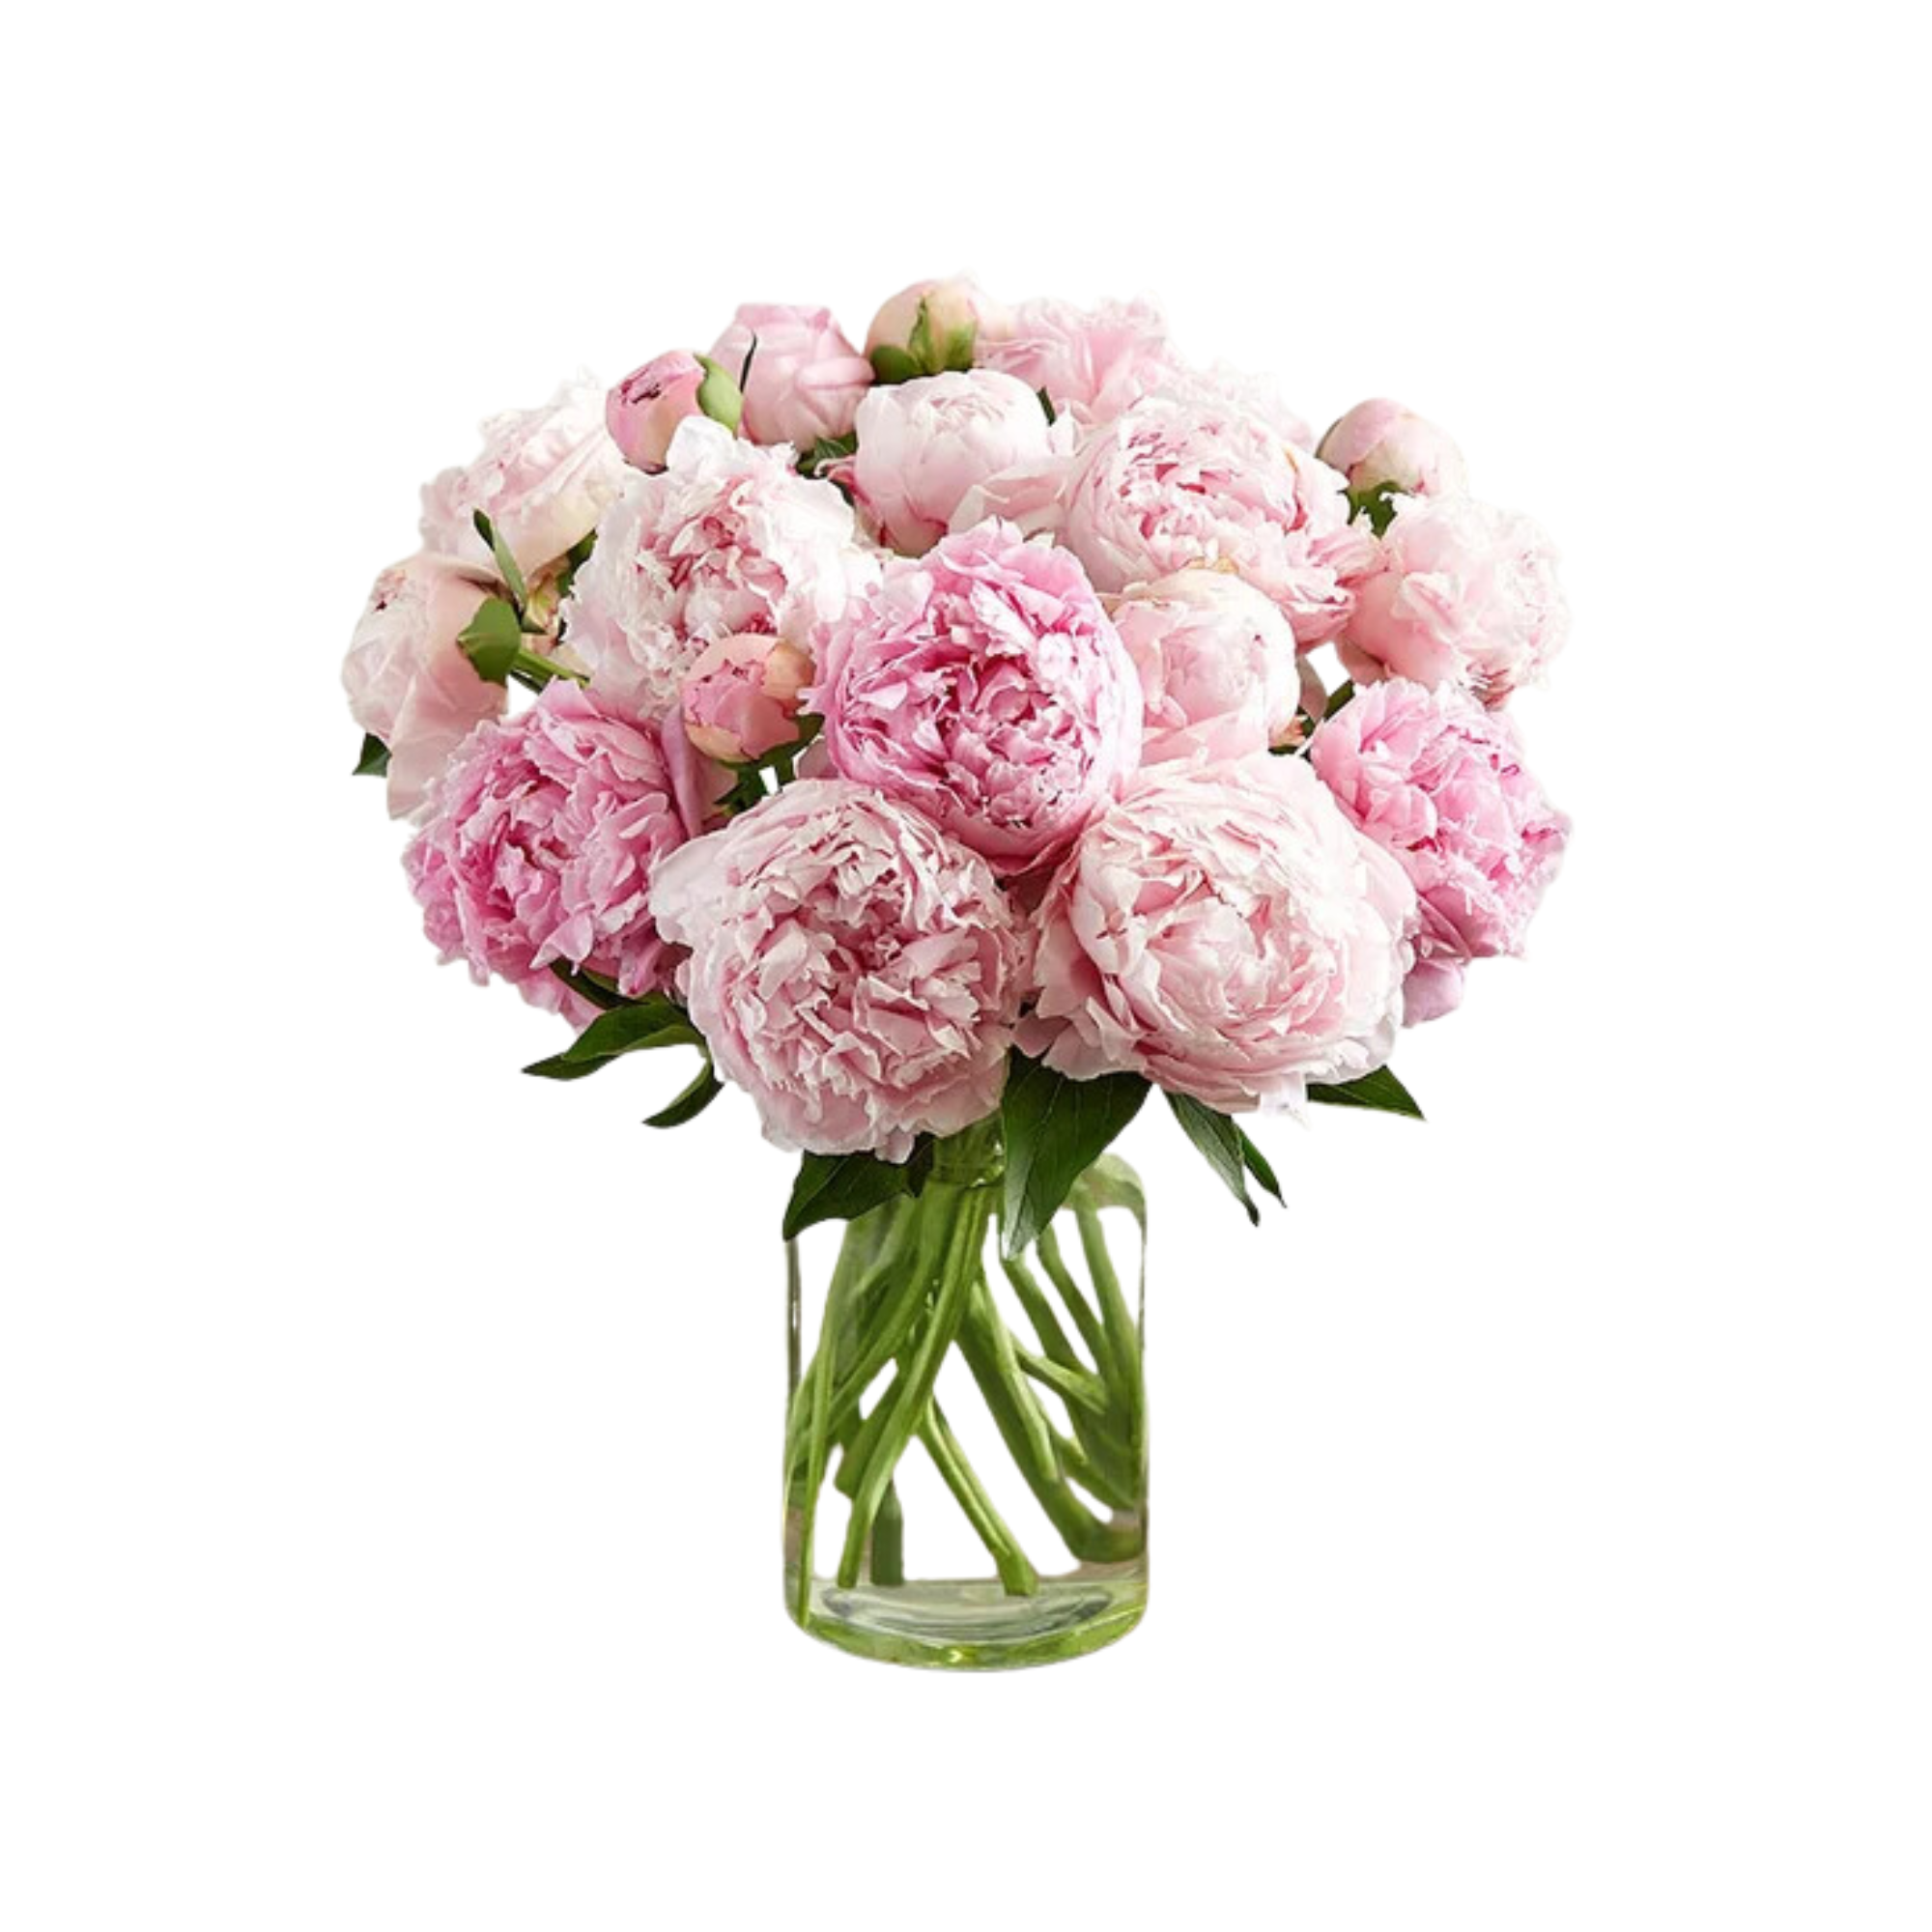 A bouquet of pink peonies